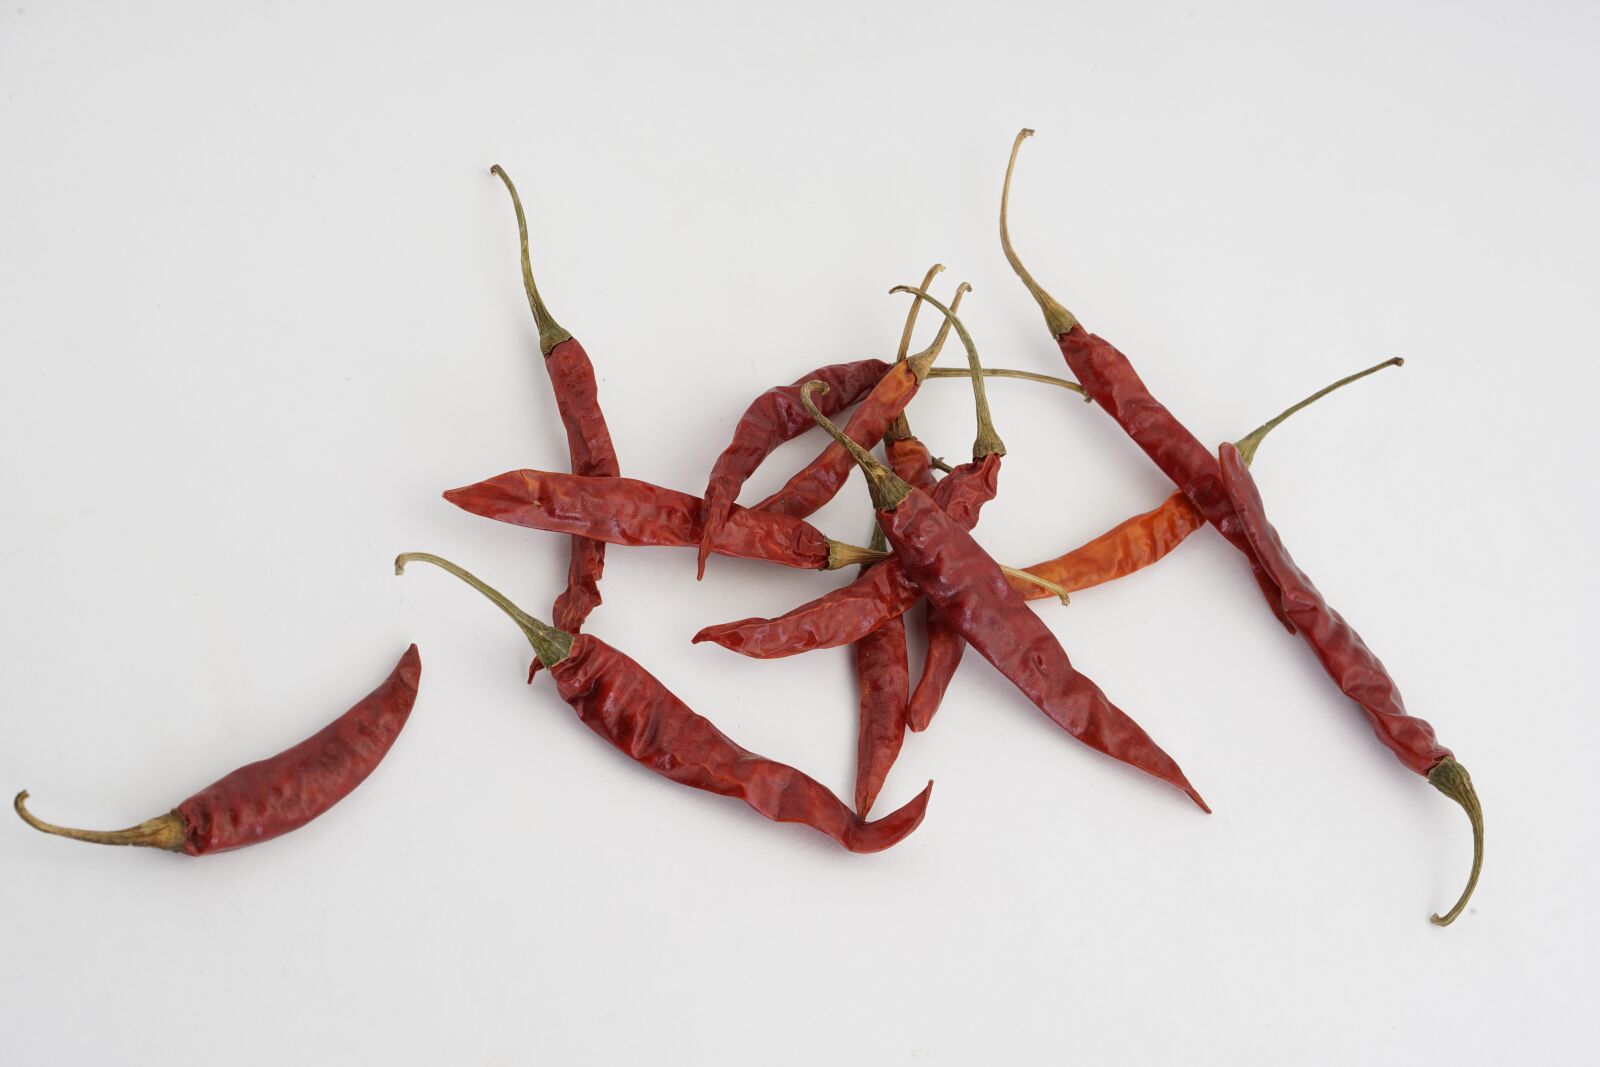 Sony a7R II sample photo. Chilli, red, ingredients photography